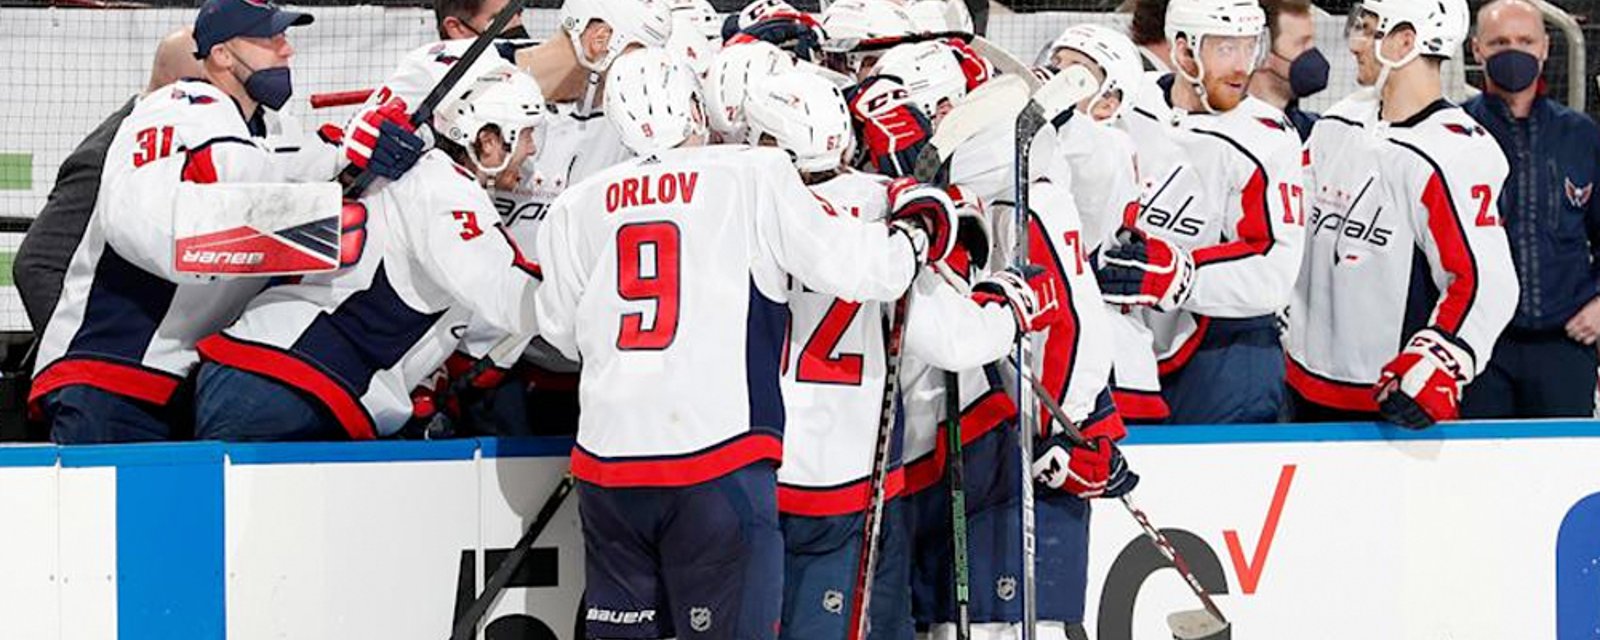 Oshie's teammates mob him after he scores hat trick goal in his first game back after his father's death